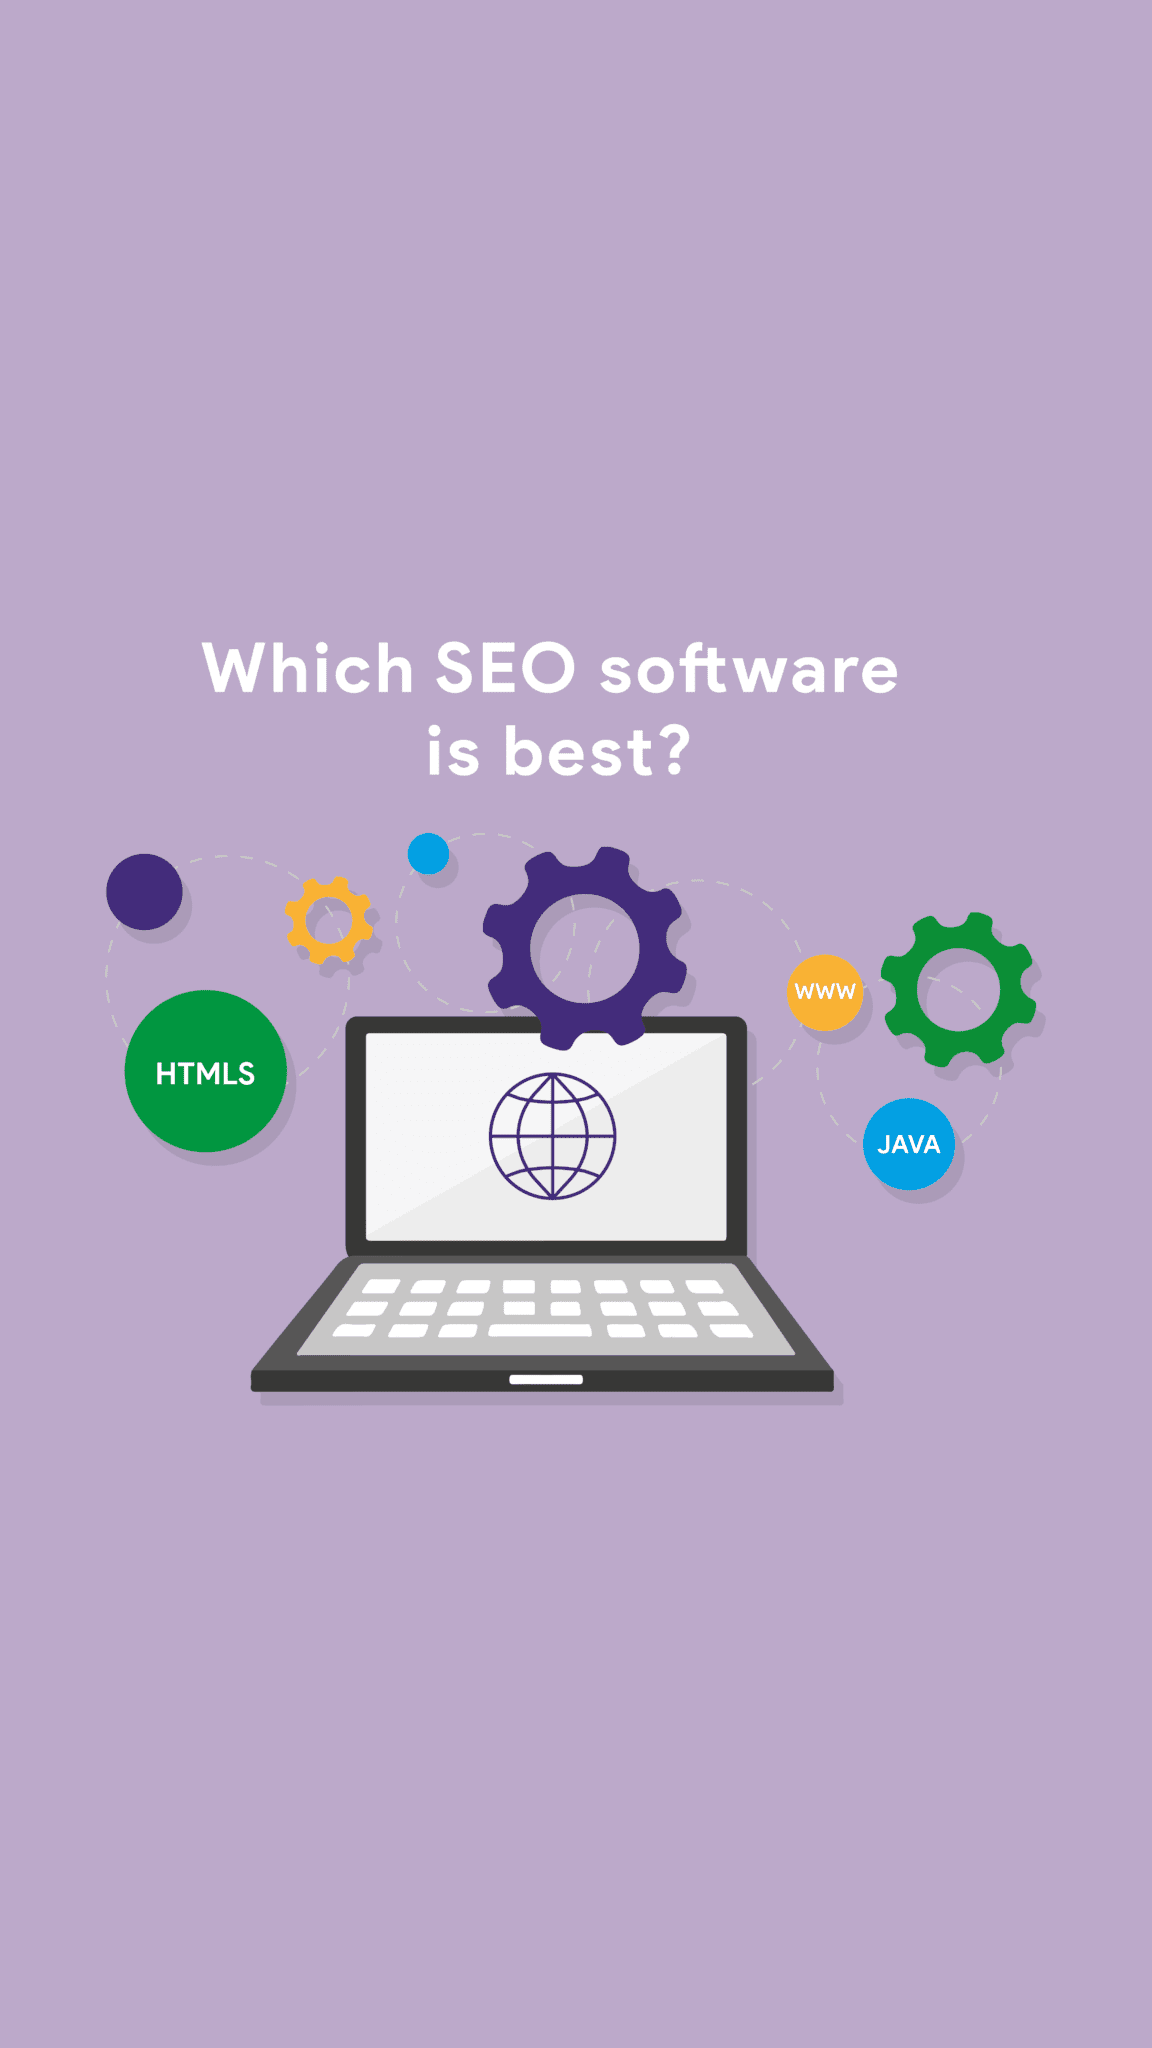 which SEO software is best